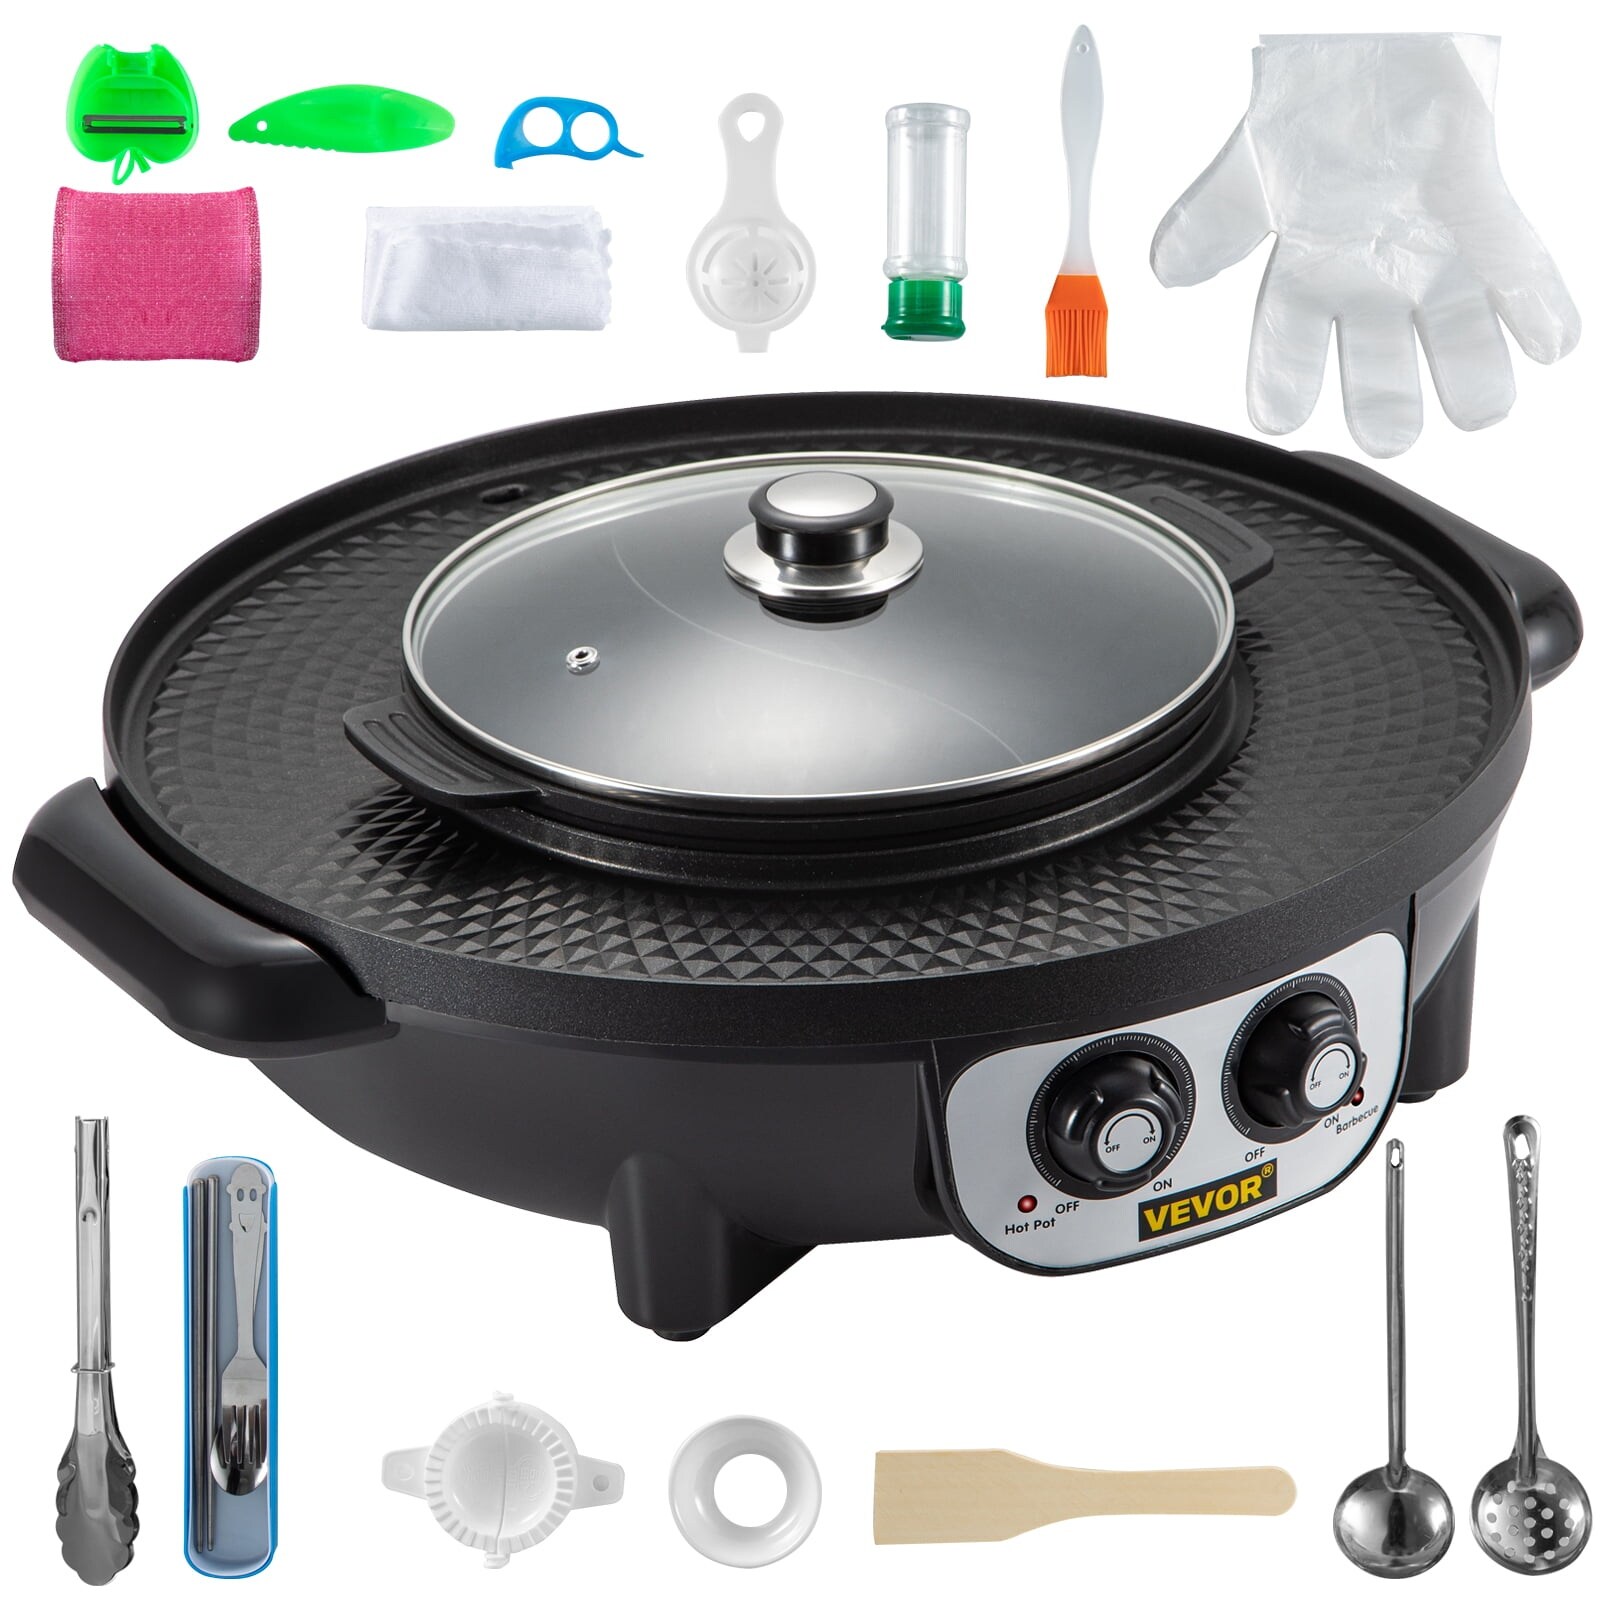 2 in 1 Hot Pot and Grill, 2200W BBQ Pan Grill and Hot Pot, Multifunctional Teppanyaki Grill Pot with Dual Temp Control - 36618522